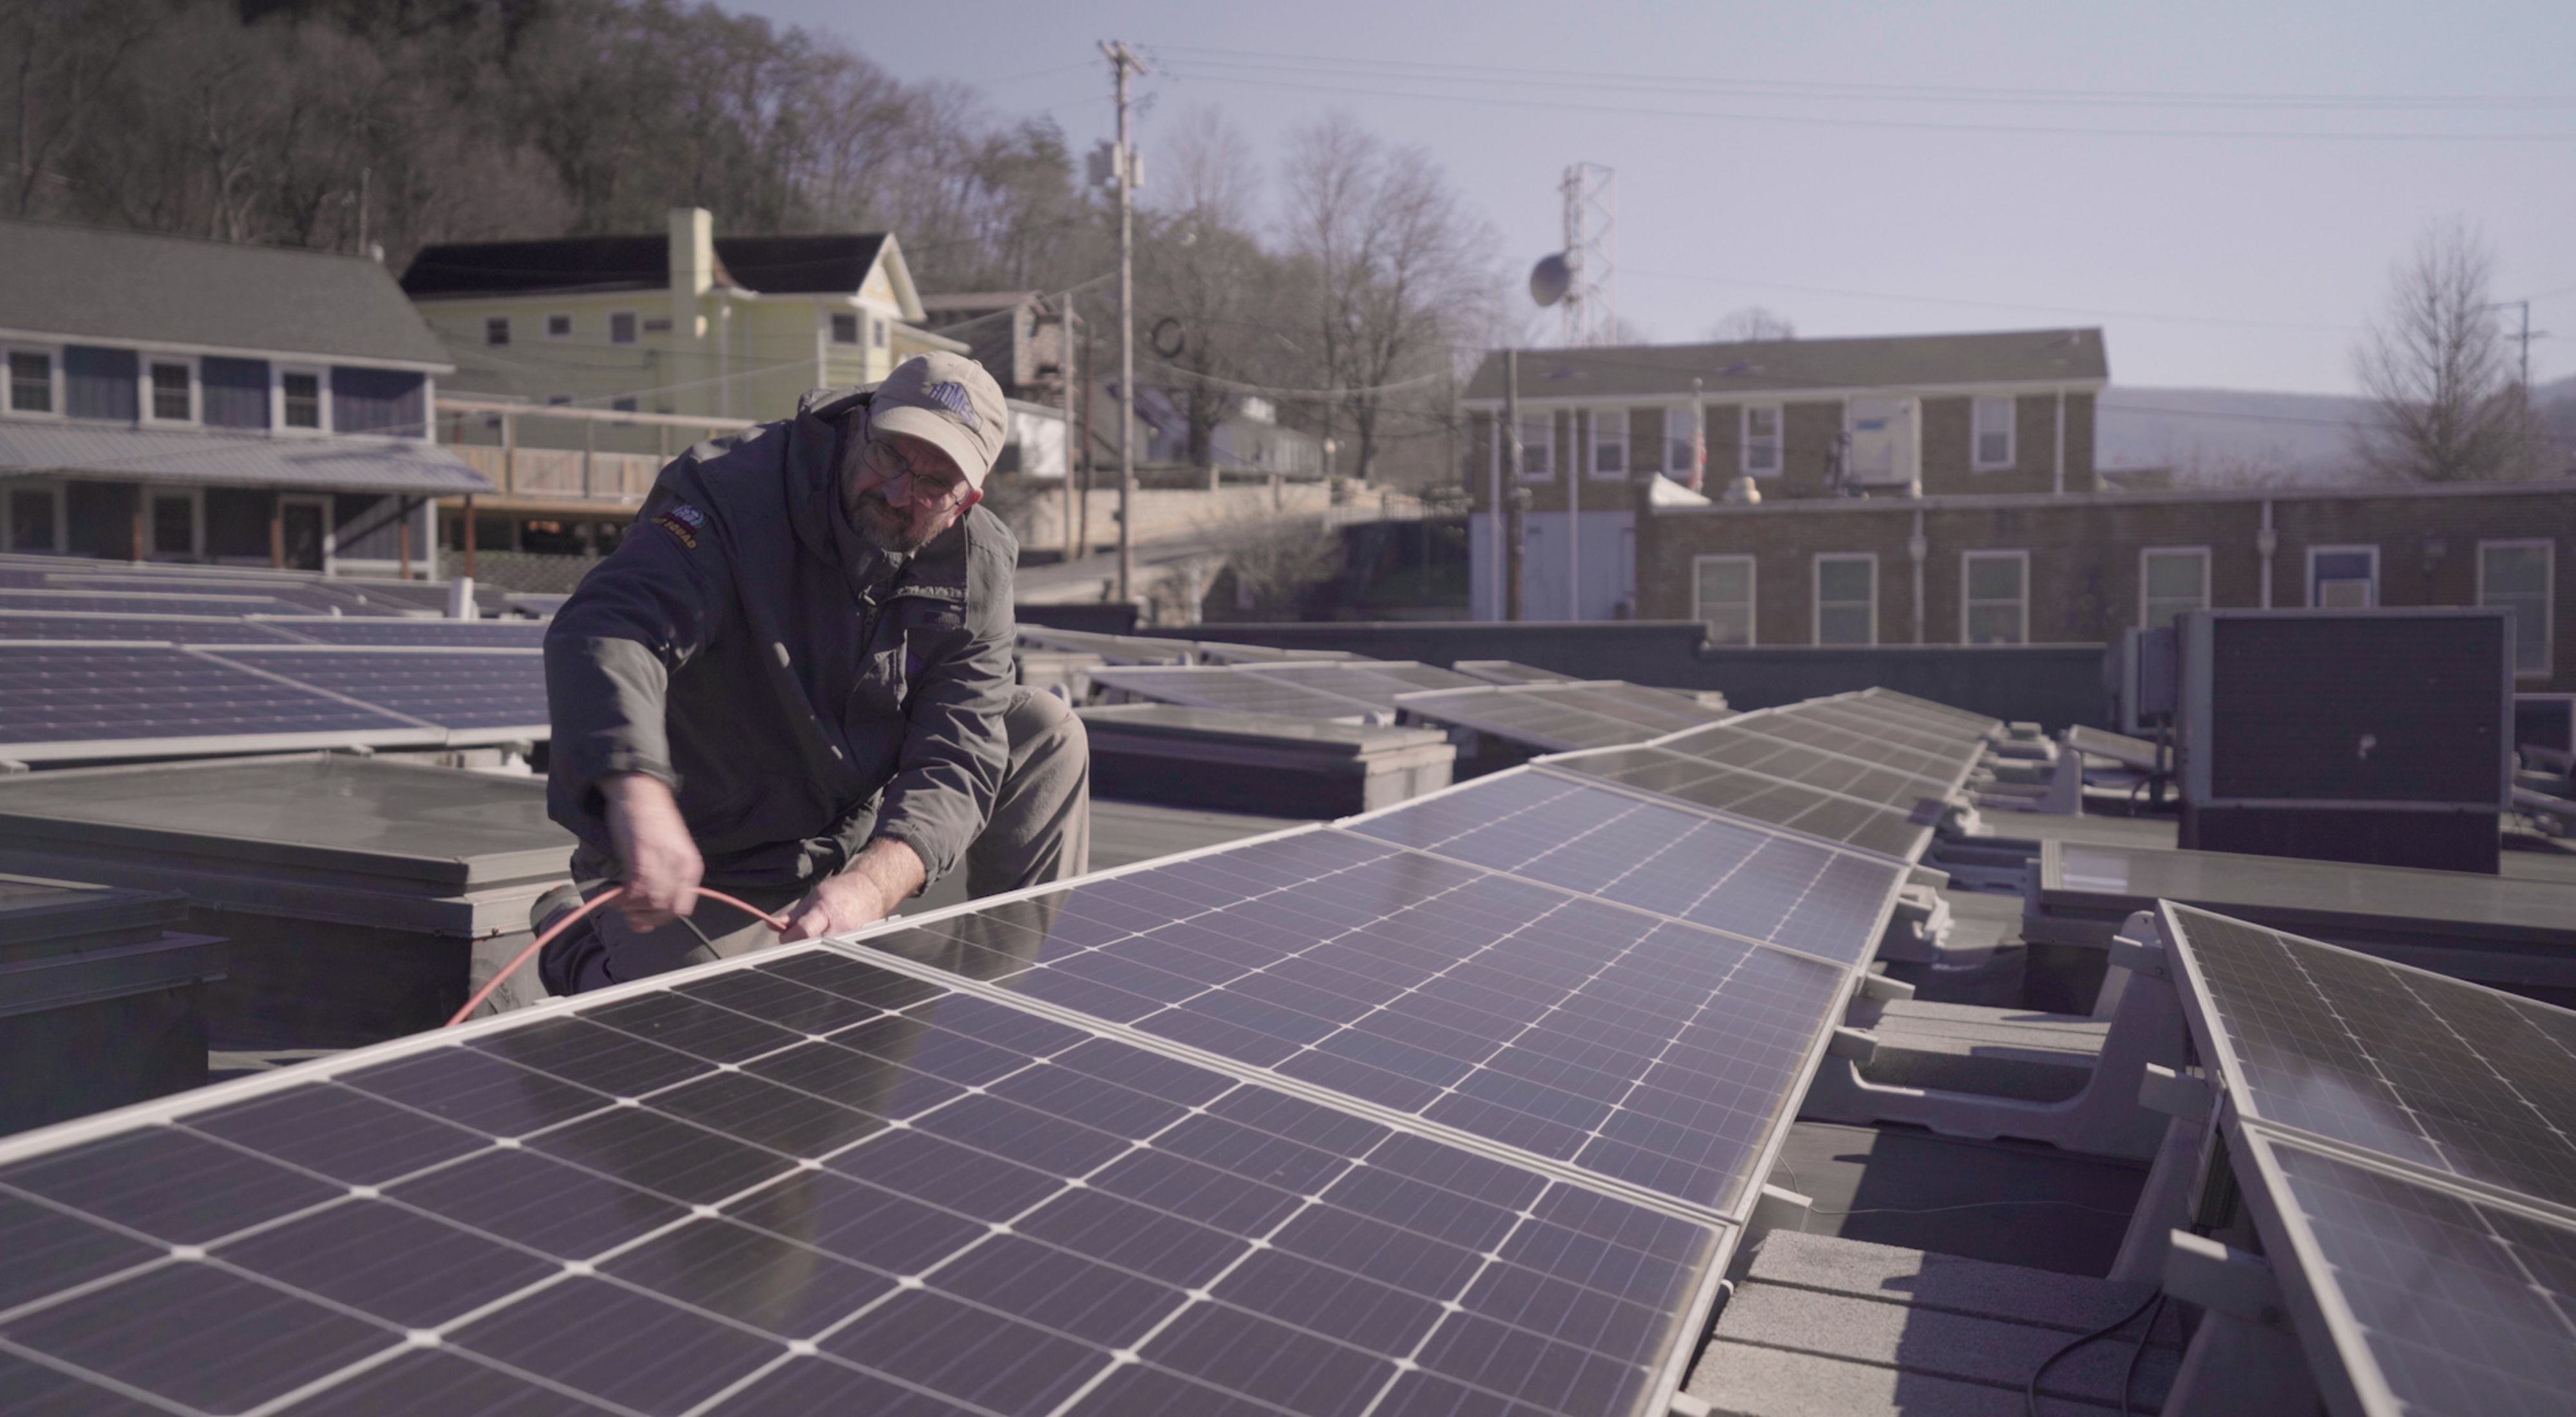 A man works on solar panels on a roof in Kentucky.